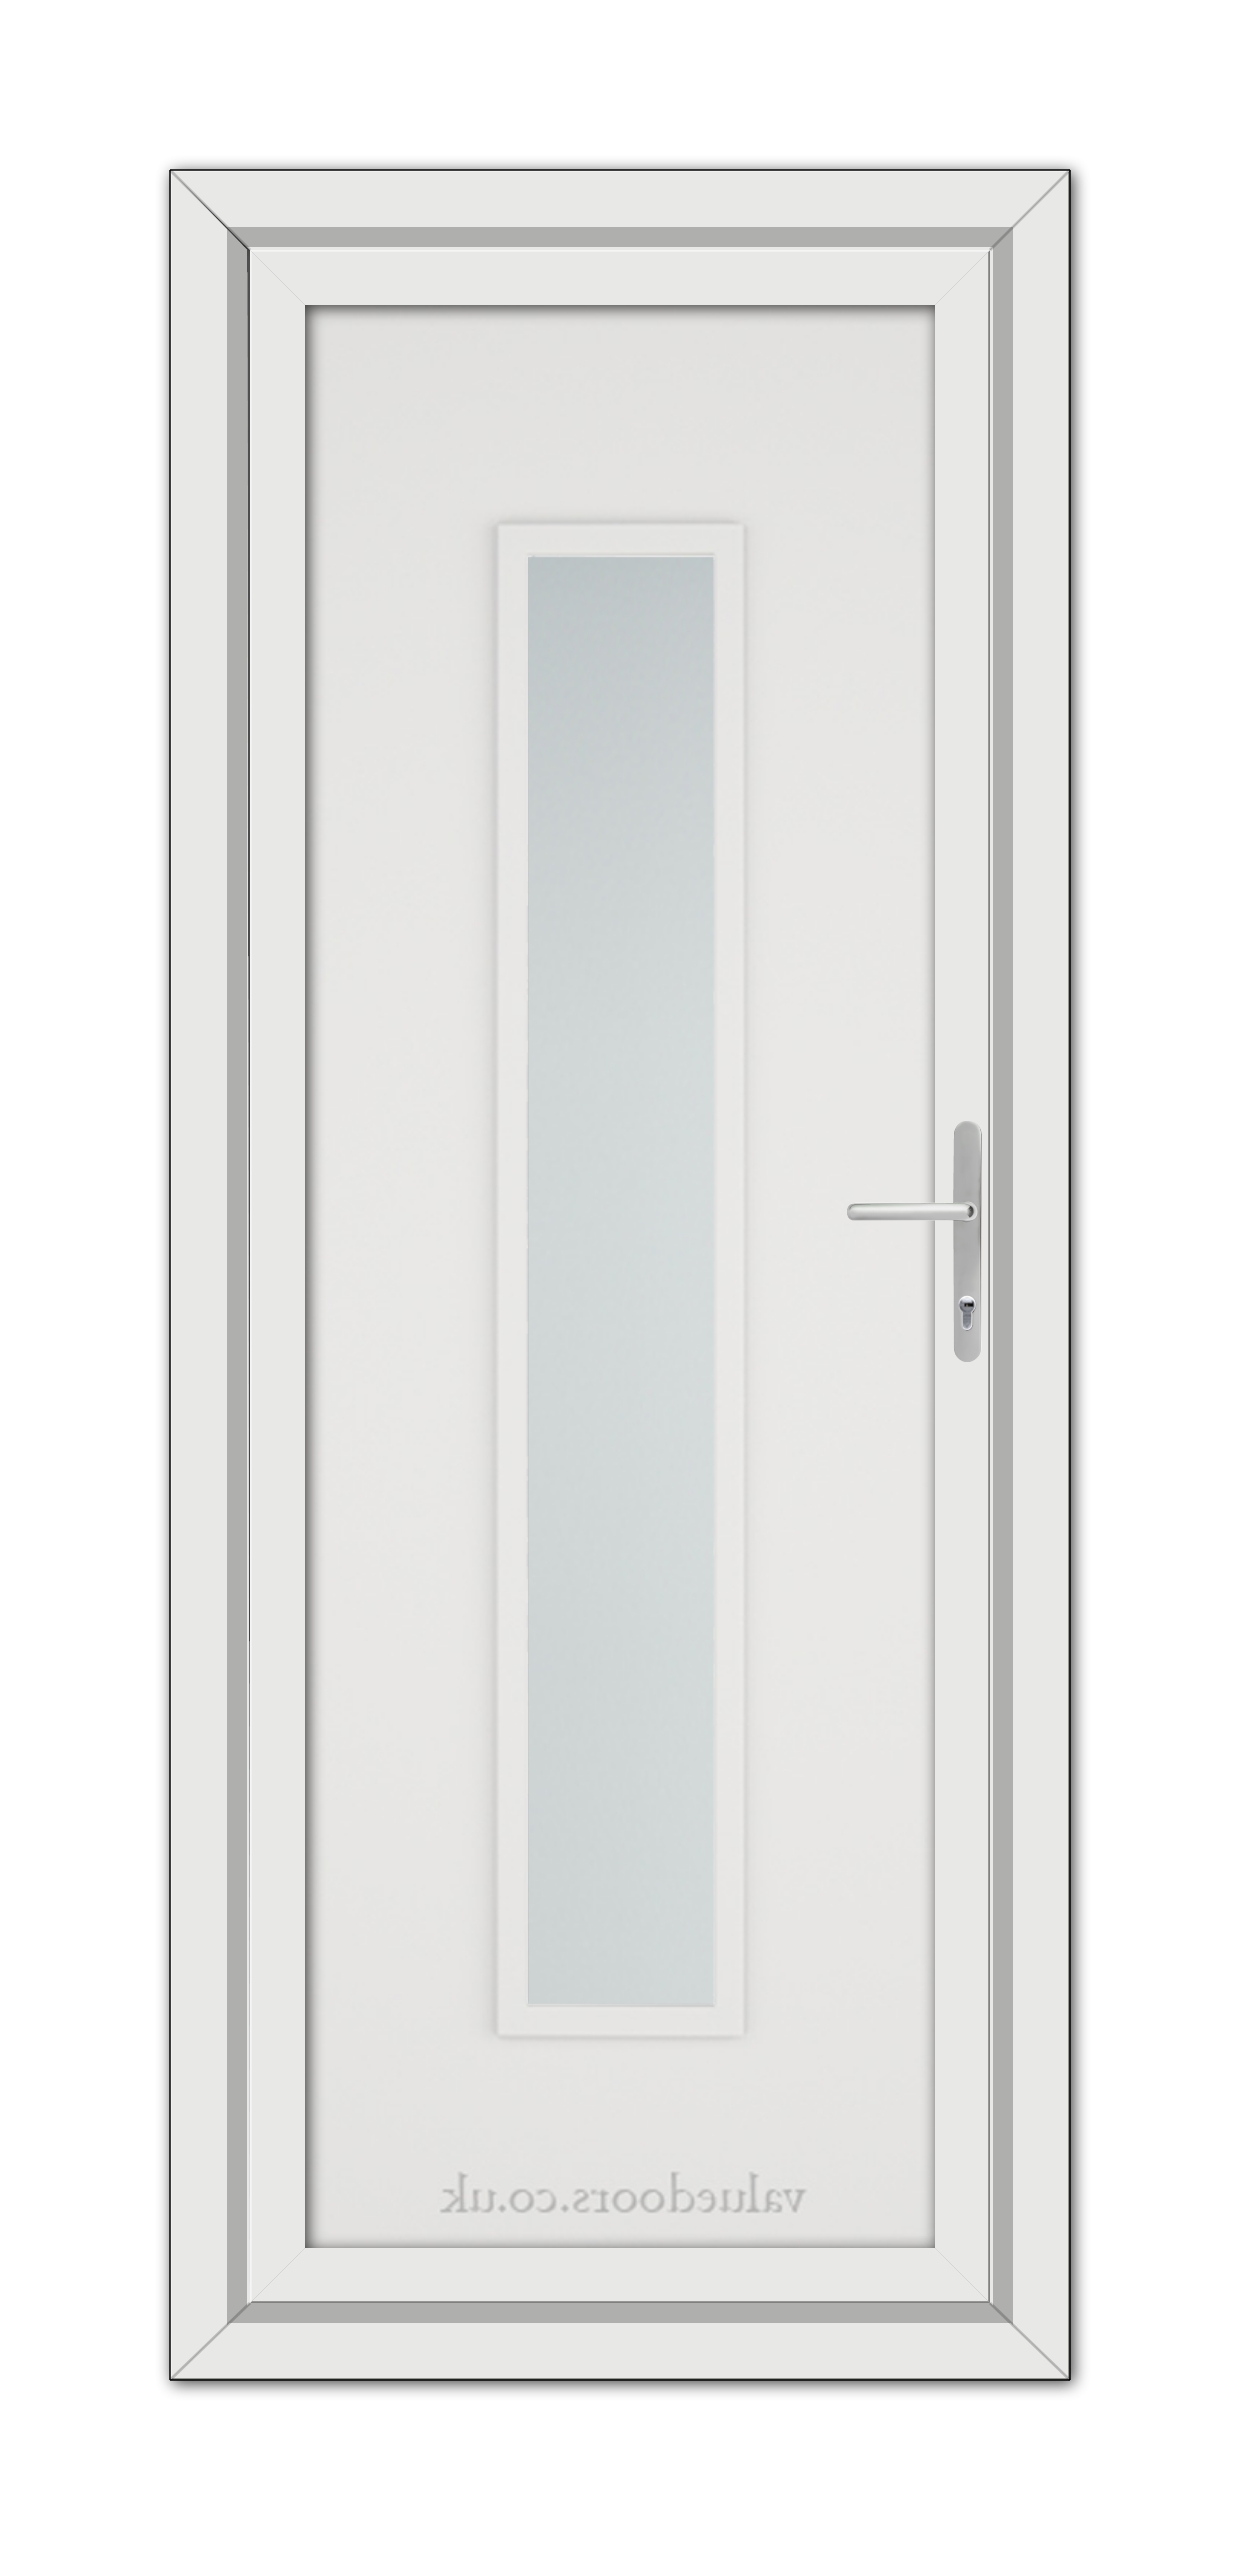 A White Modern 5101 uPVC door with a vertical, frosted glass panel and a metallic handle, displayed against a white background.